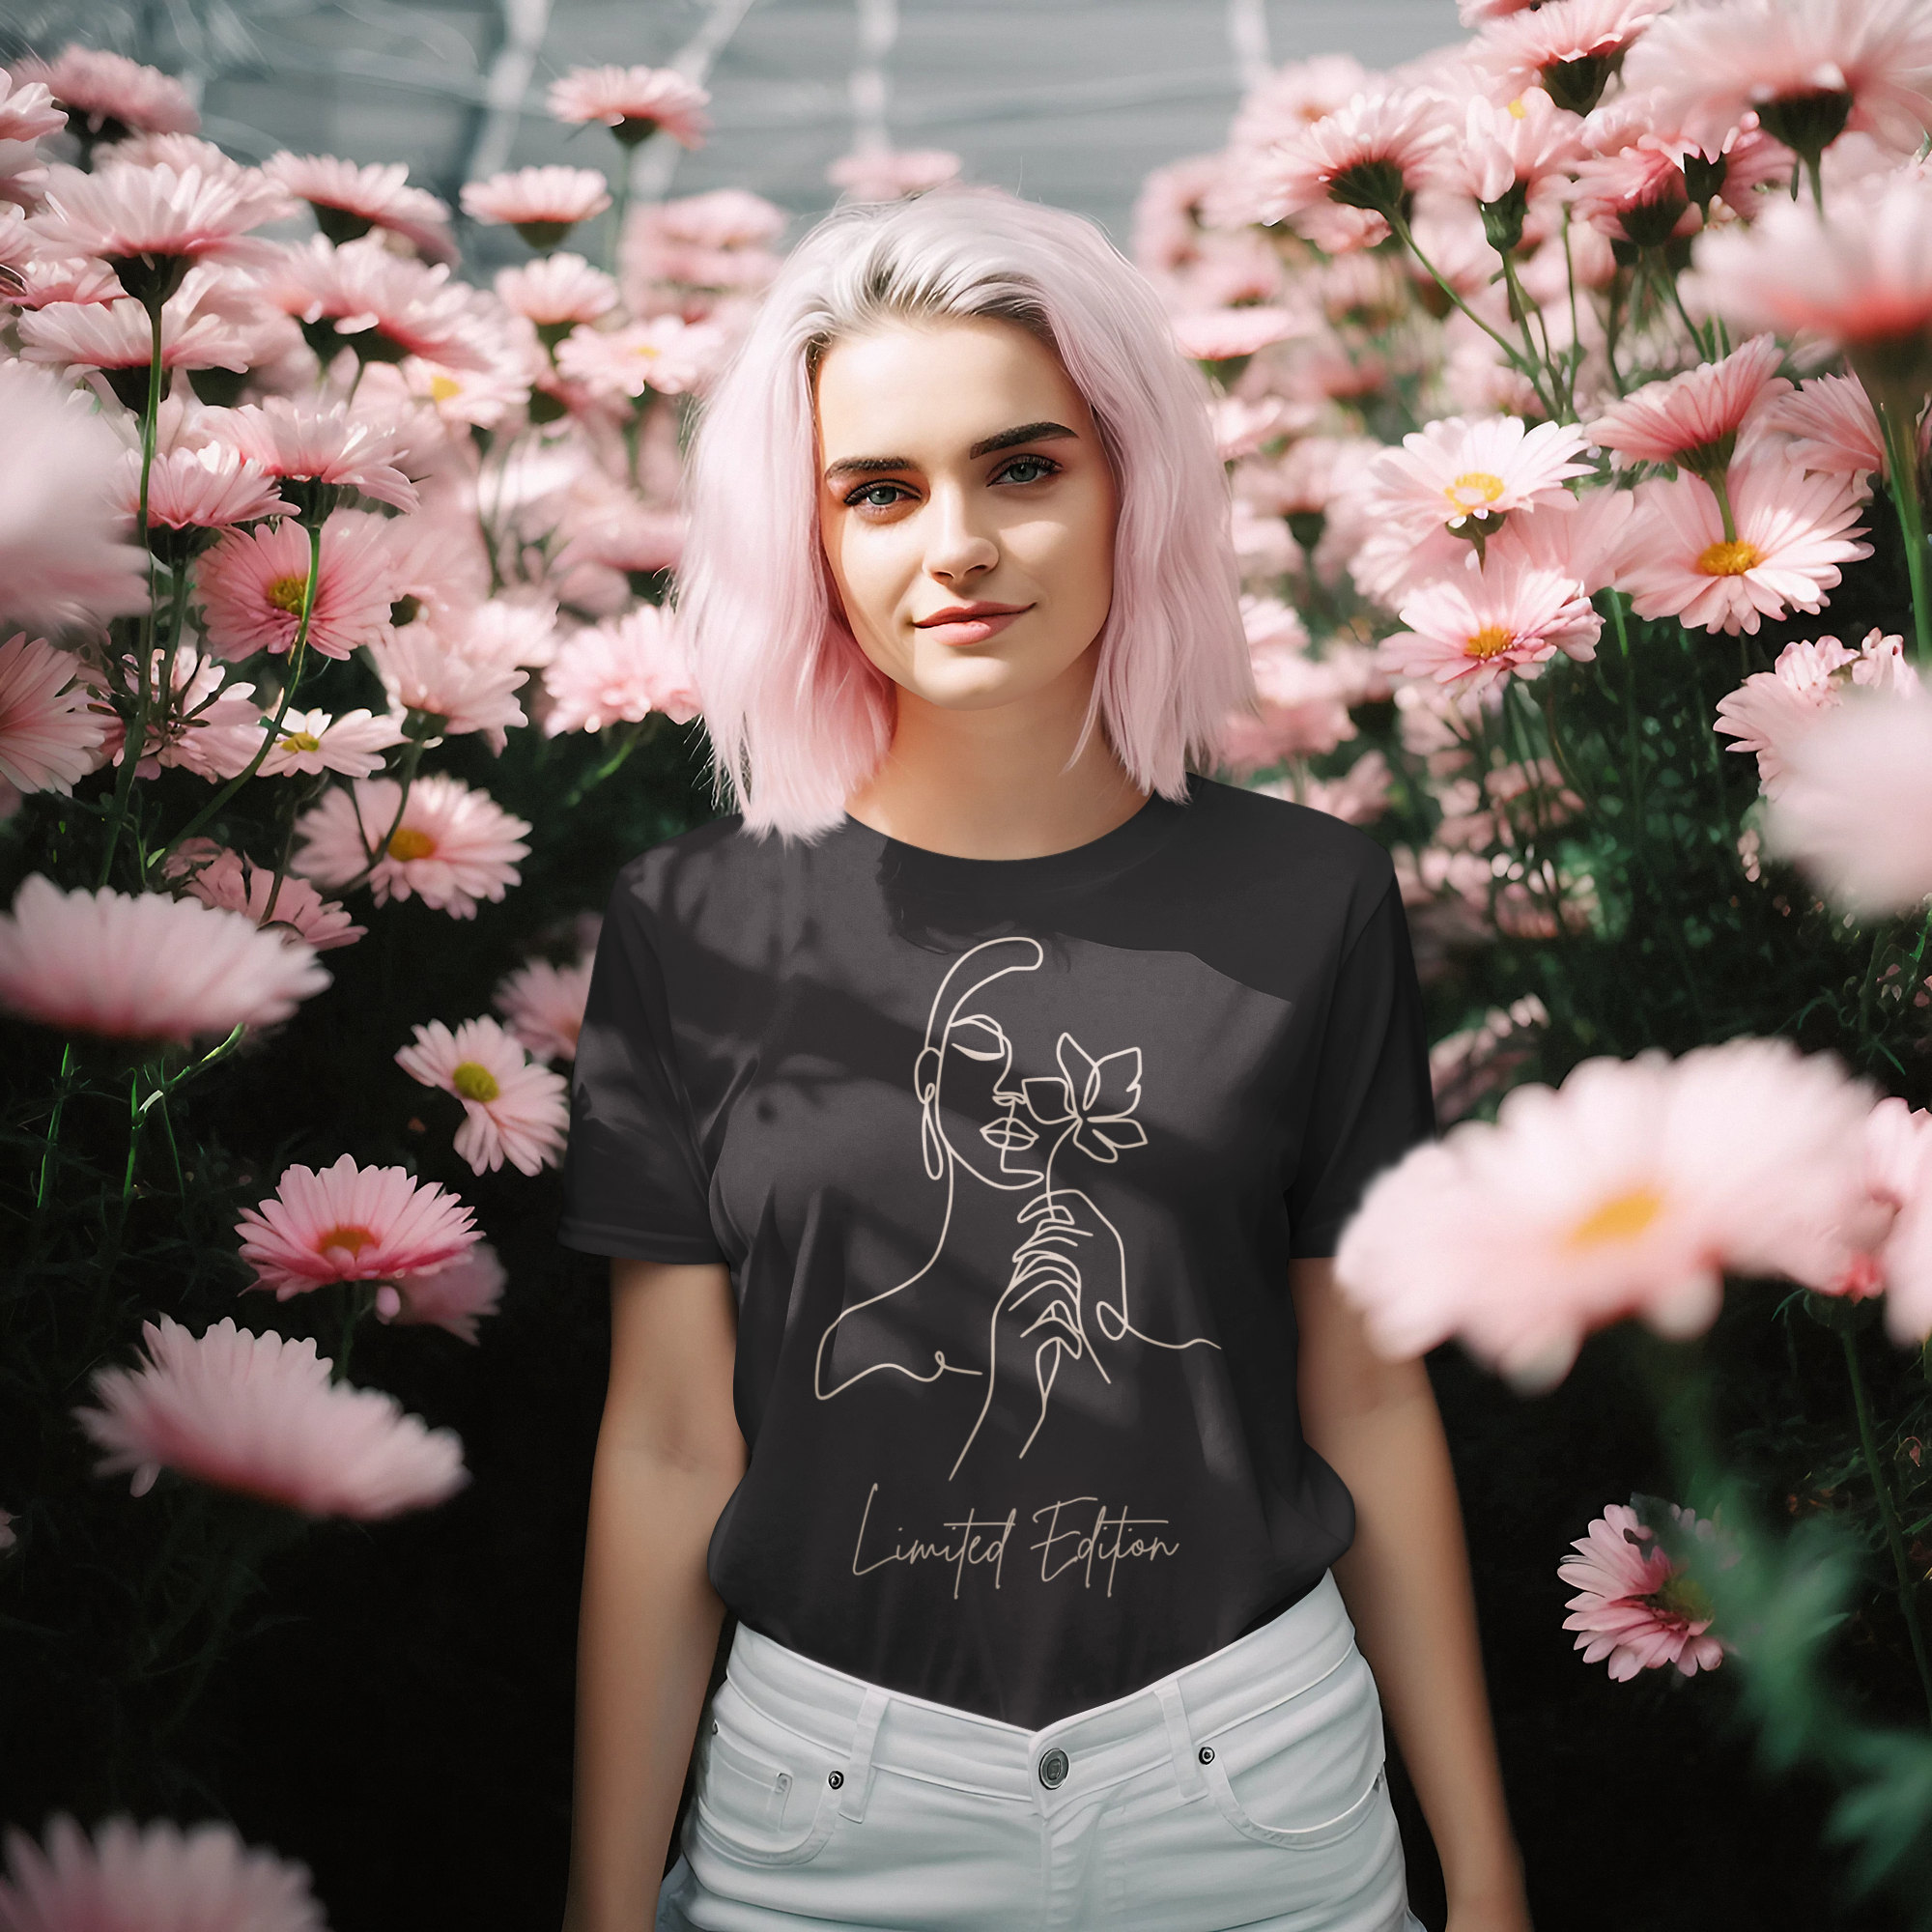 'New Limited Edition' Women's Cotton T-Shirt with Minimalistic Women with Flower Design